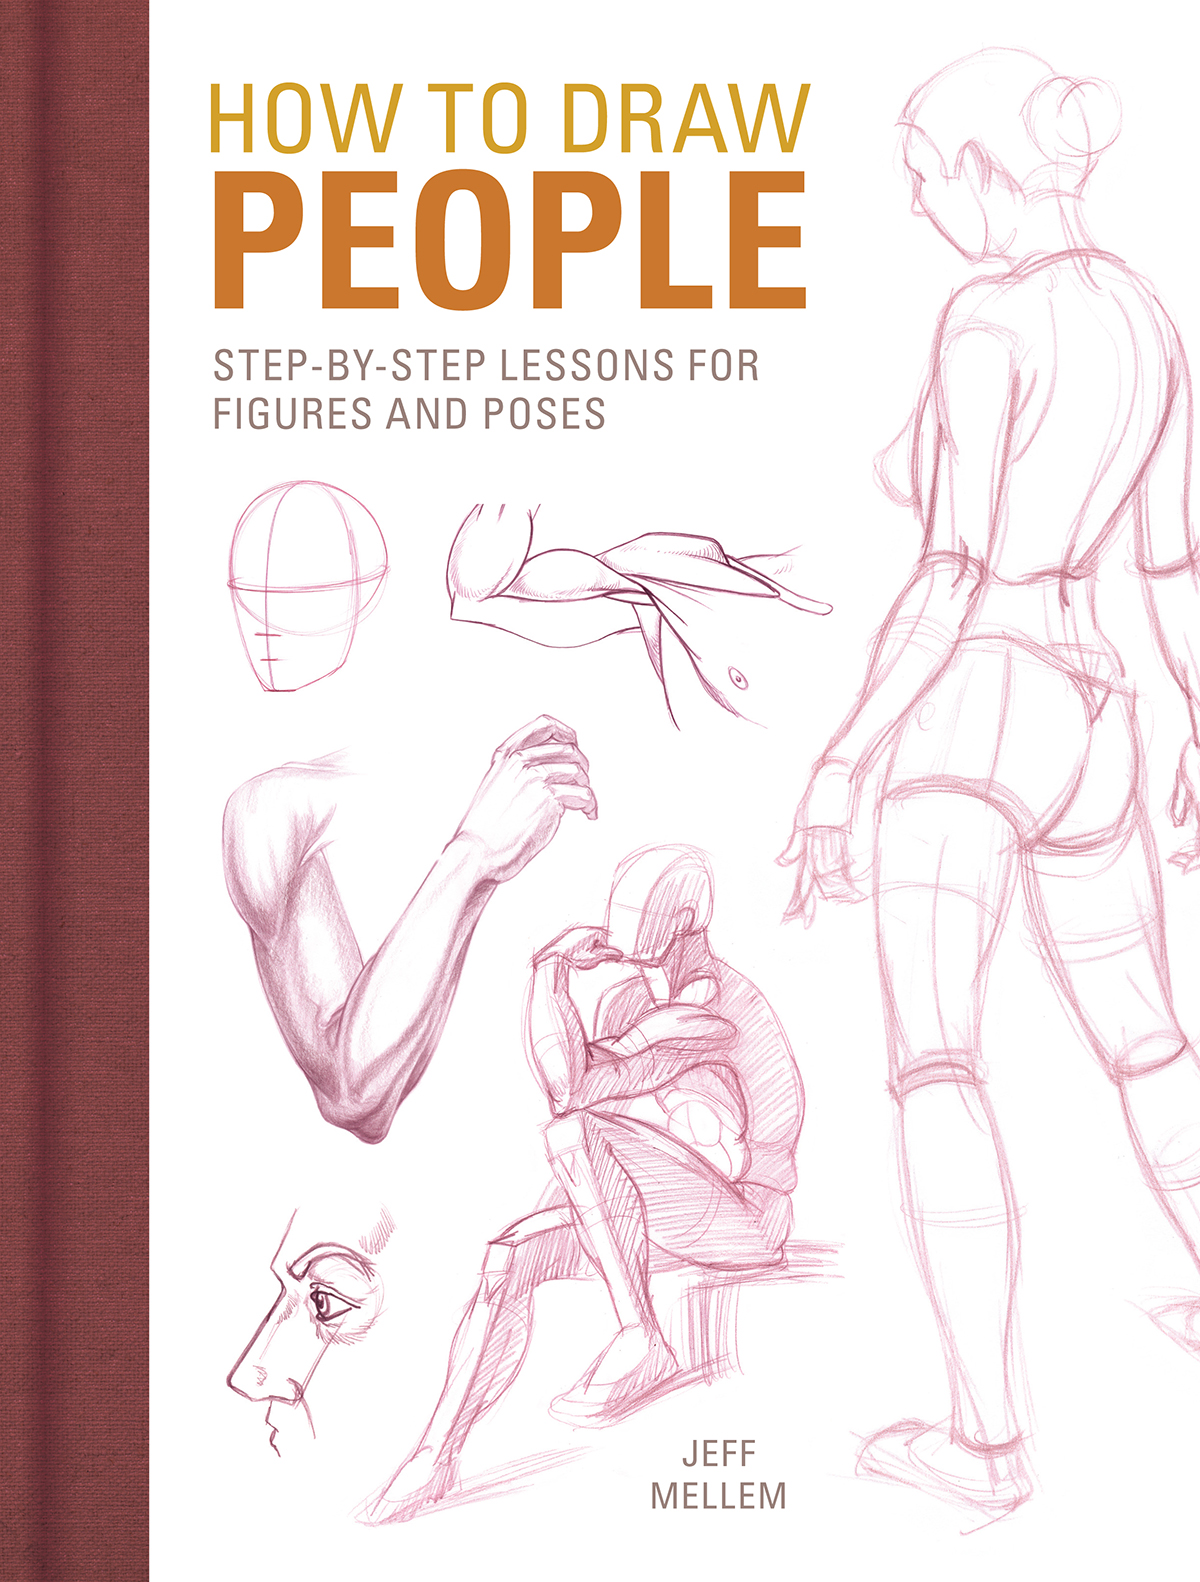 How to Draw People Step-by-Step Lessons for Figures and Poses Jeff Mellem - photo 1